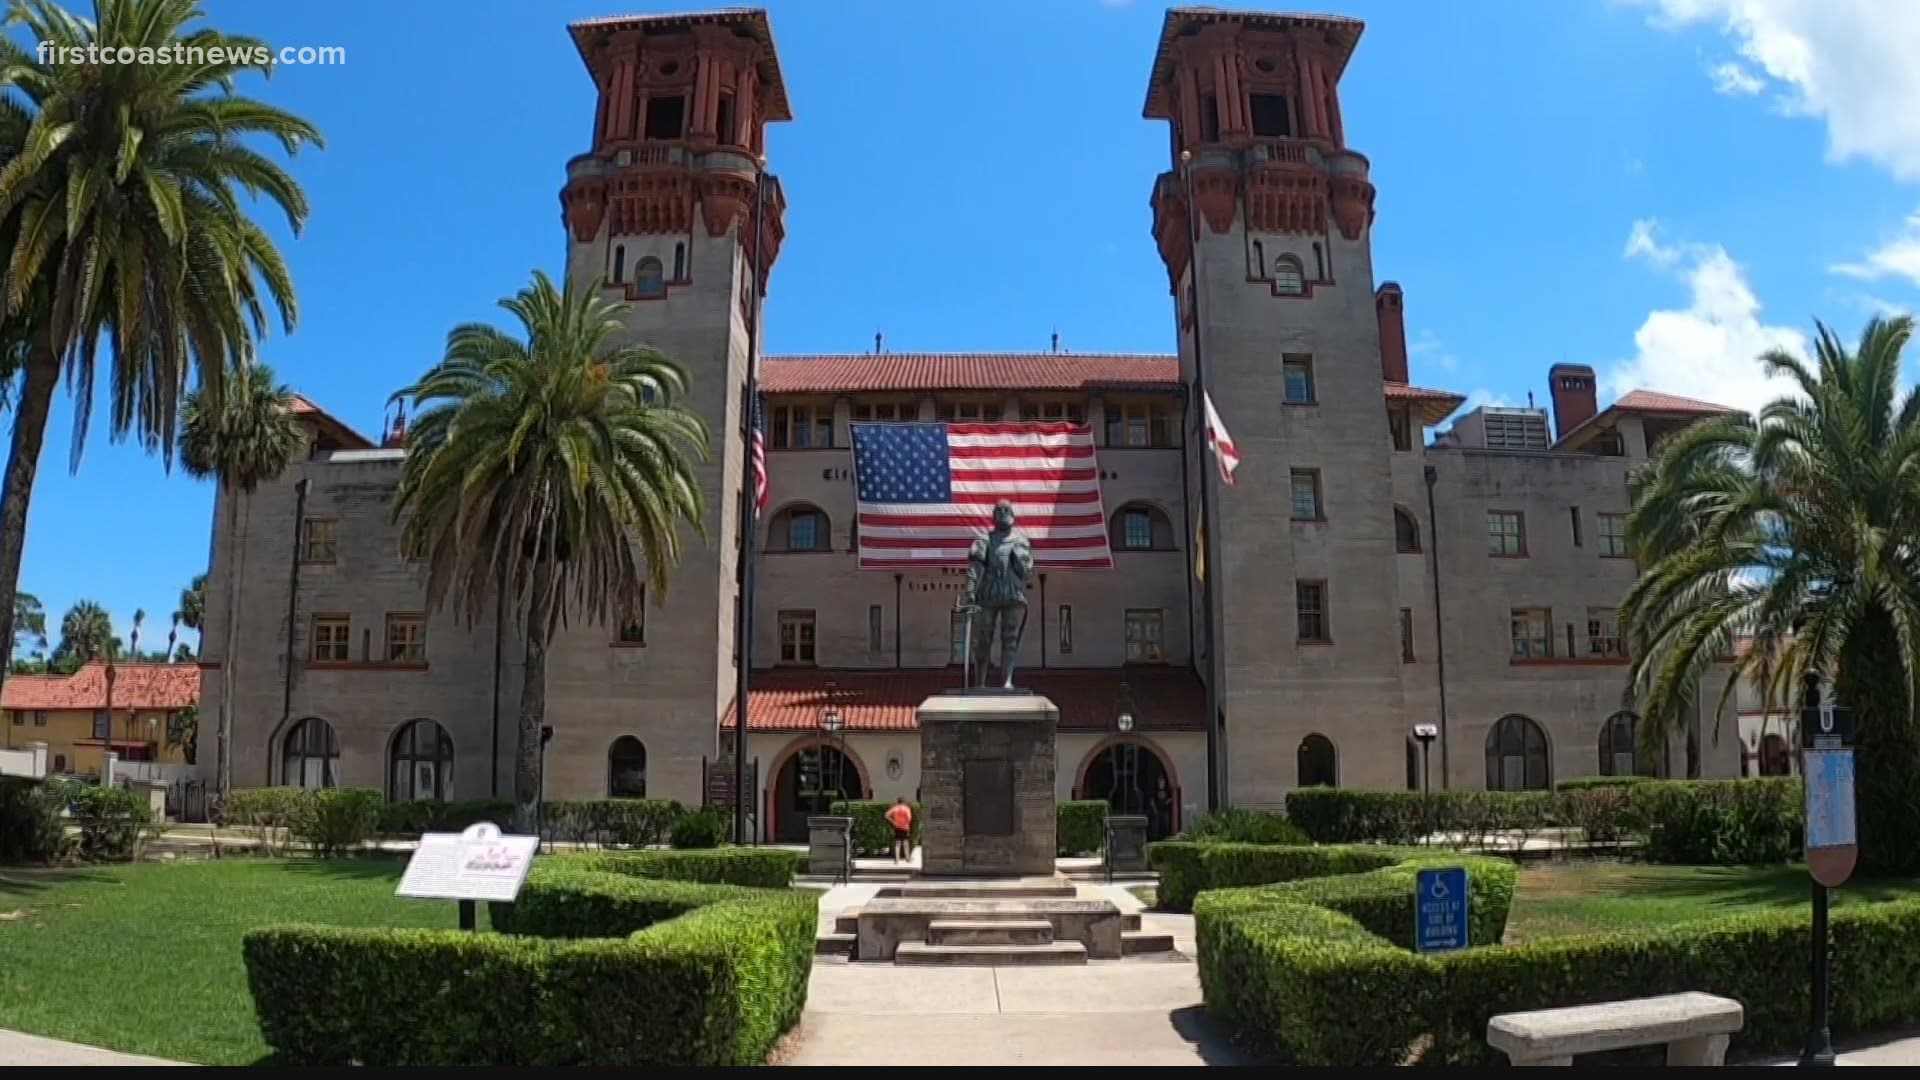 The City of St. Augustine does not have hooks or holders for flags.